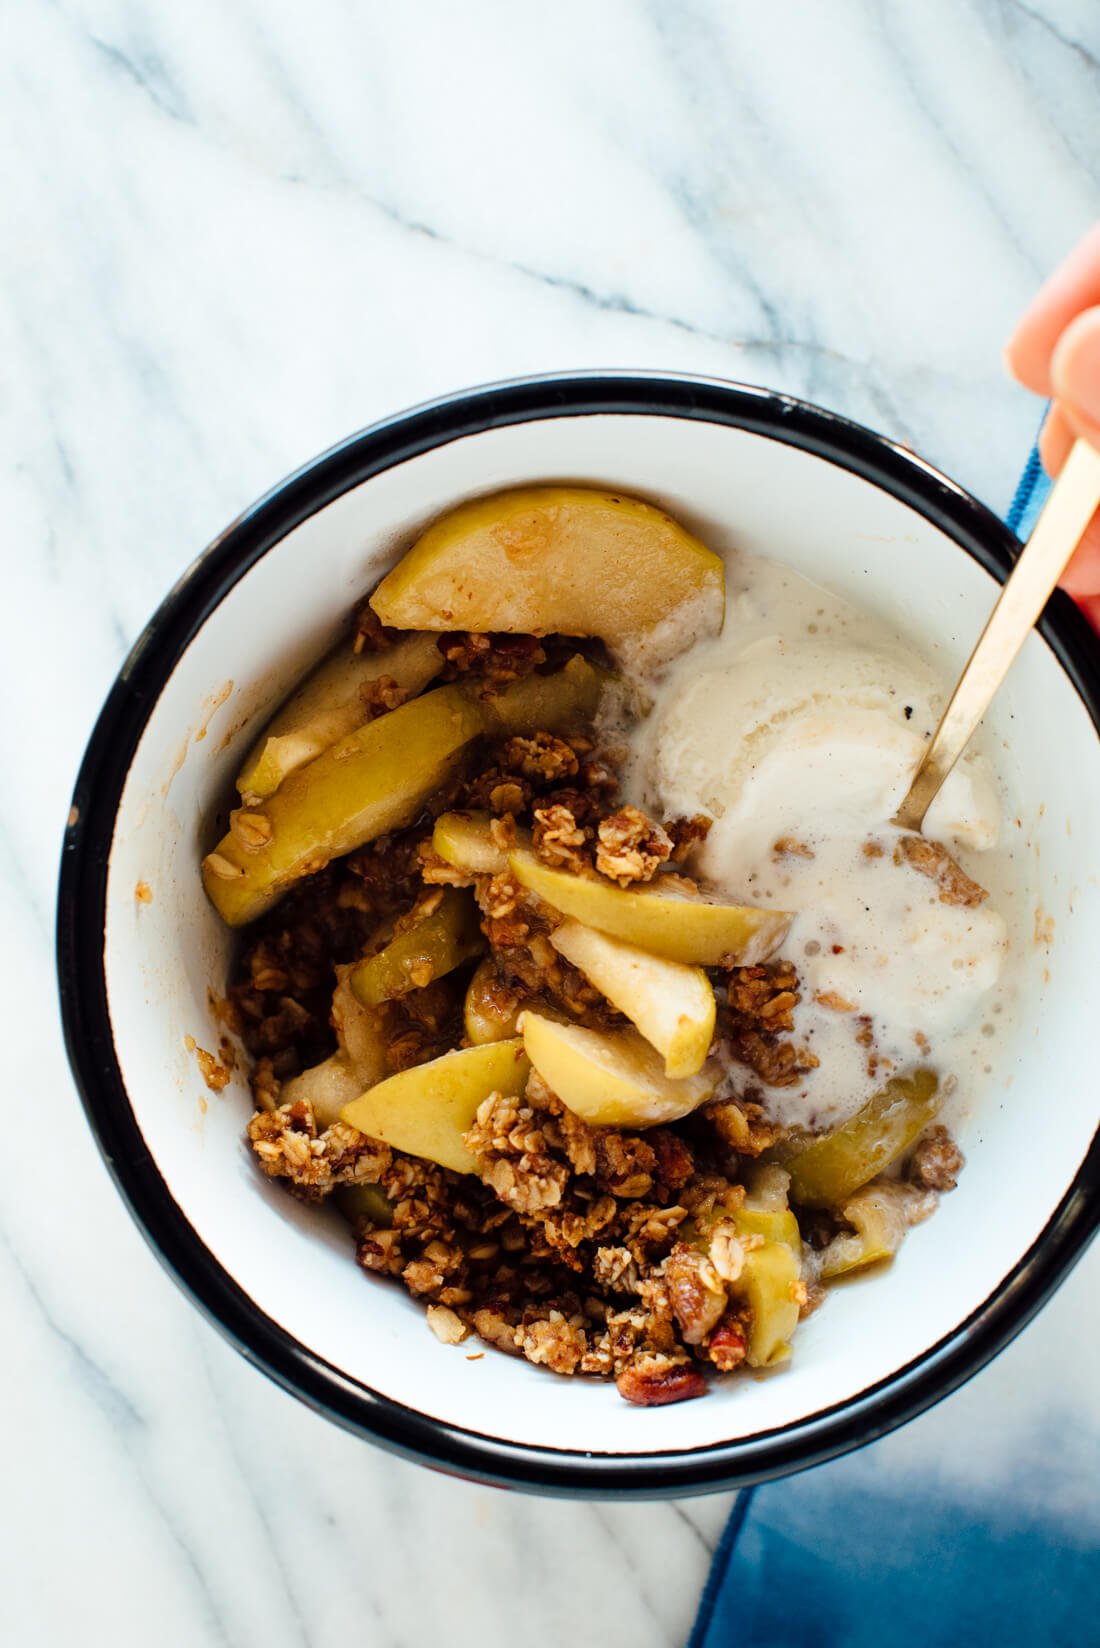 This delicious apple crisp recipe happens to be gluten free and naturally sweetened!